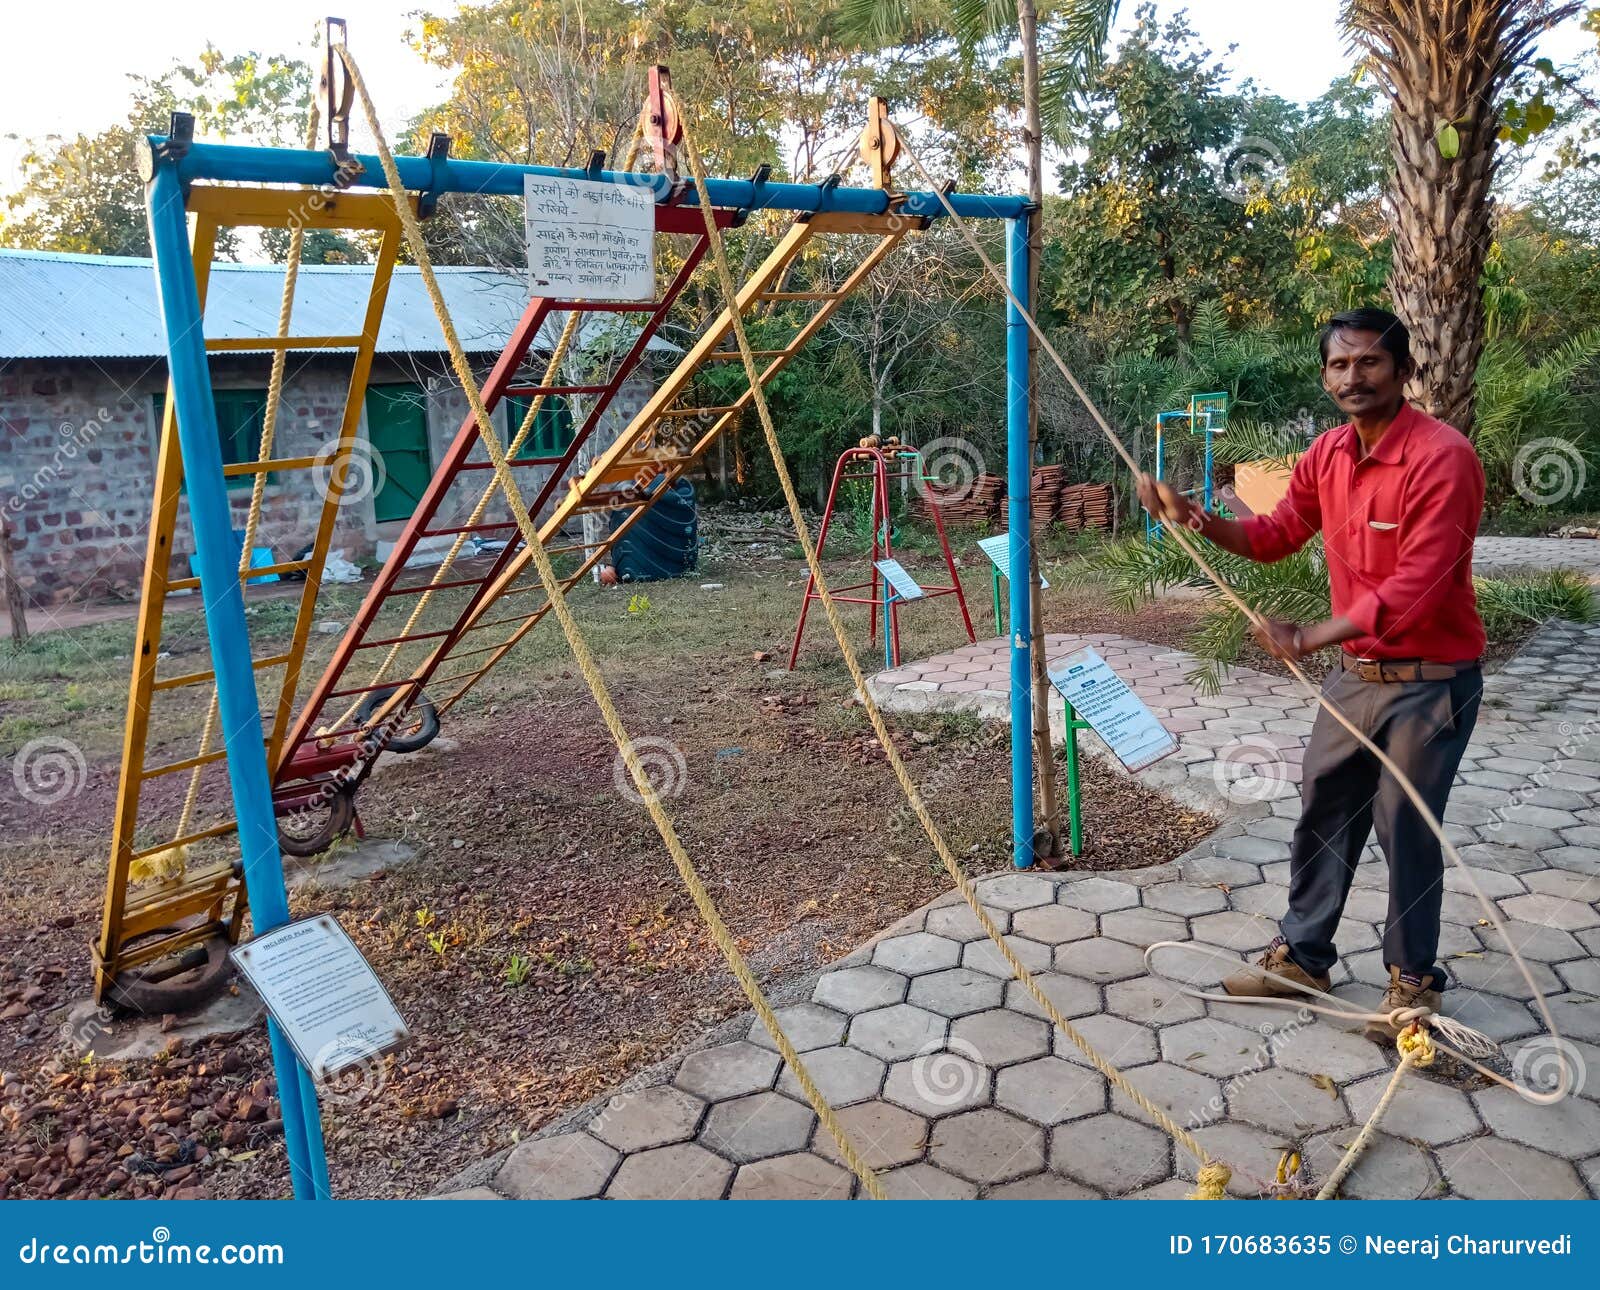 A Man Pulling Rope at Science Model for Testing in India January 2020  Editorial Image - Image of exhibition, equipment: 170683635